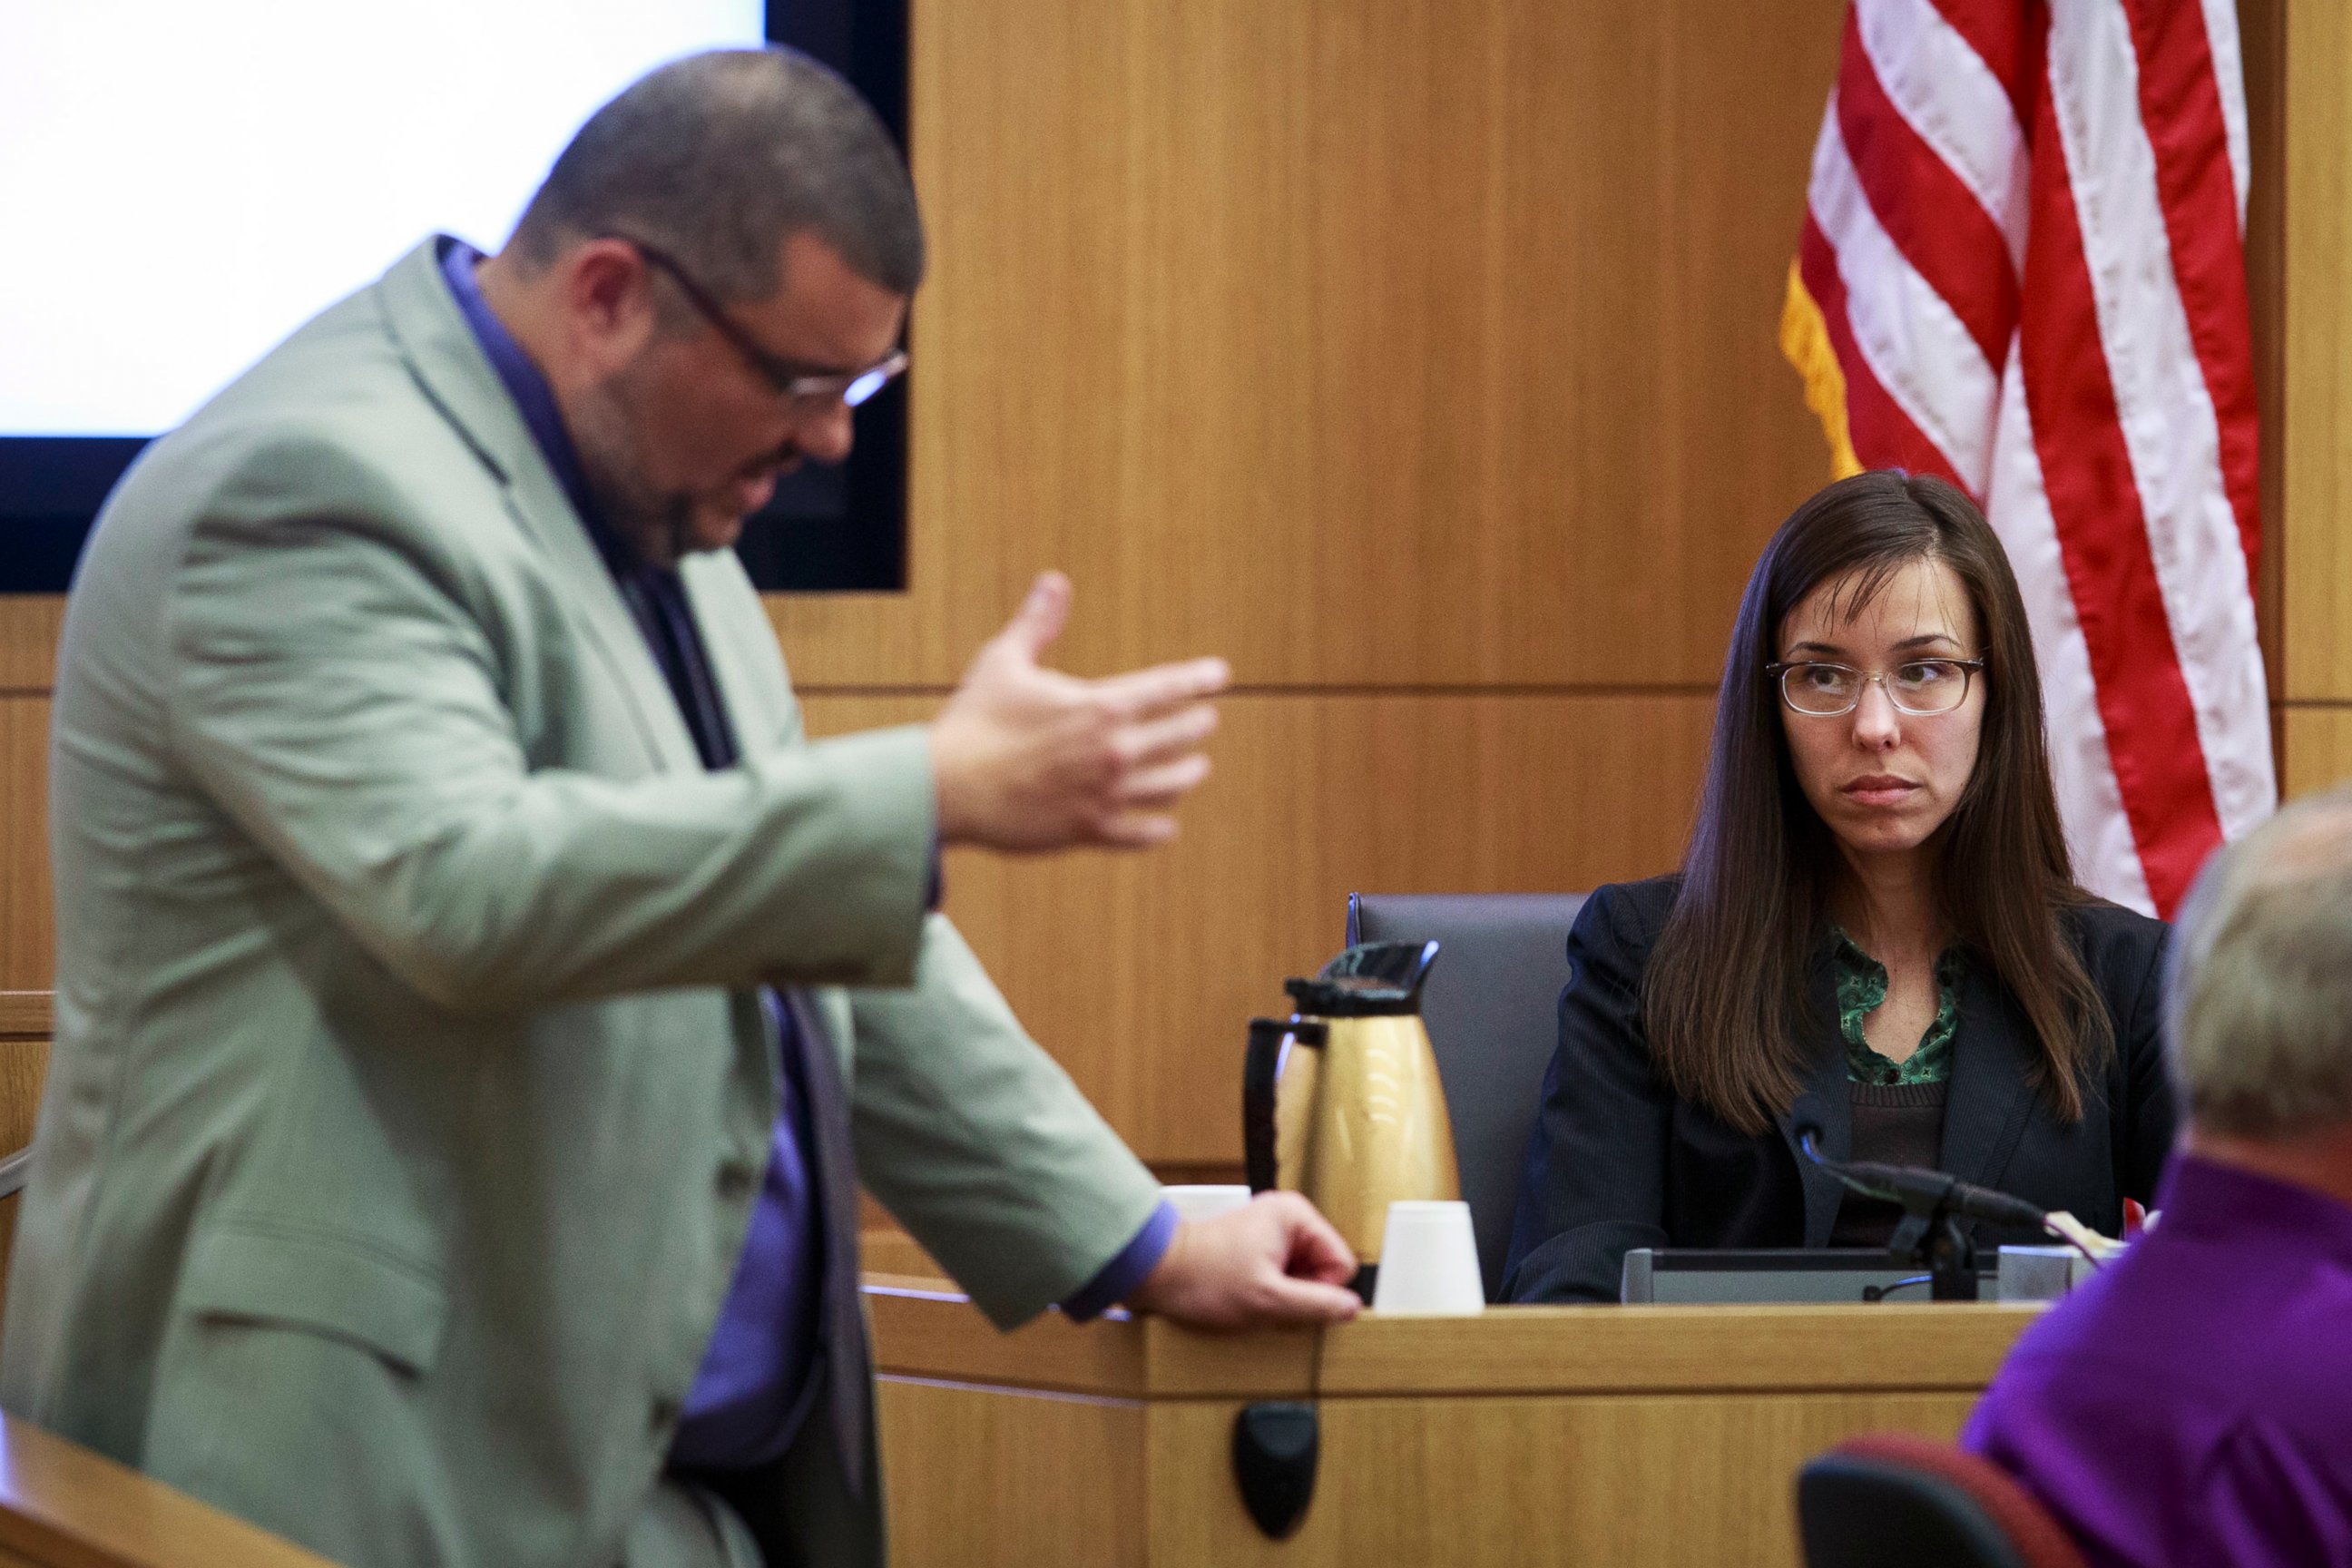 PHOTO: Defense attorney Kirk Nurmi questions defendant Jodi Arias about her relationship with Travis Alexander during her trial at Judge Sherry Stephens' Superior Court, Feb. 6, 2013.